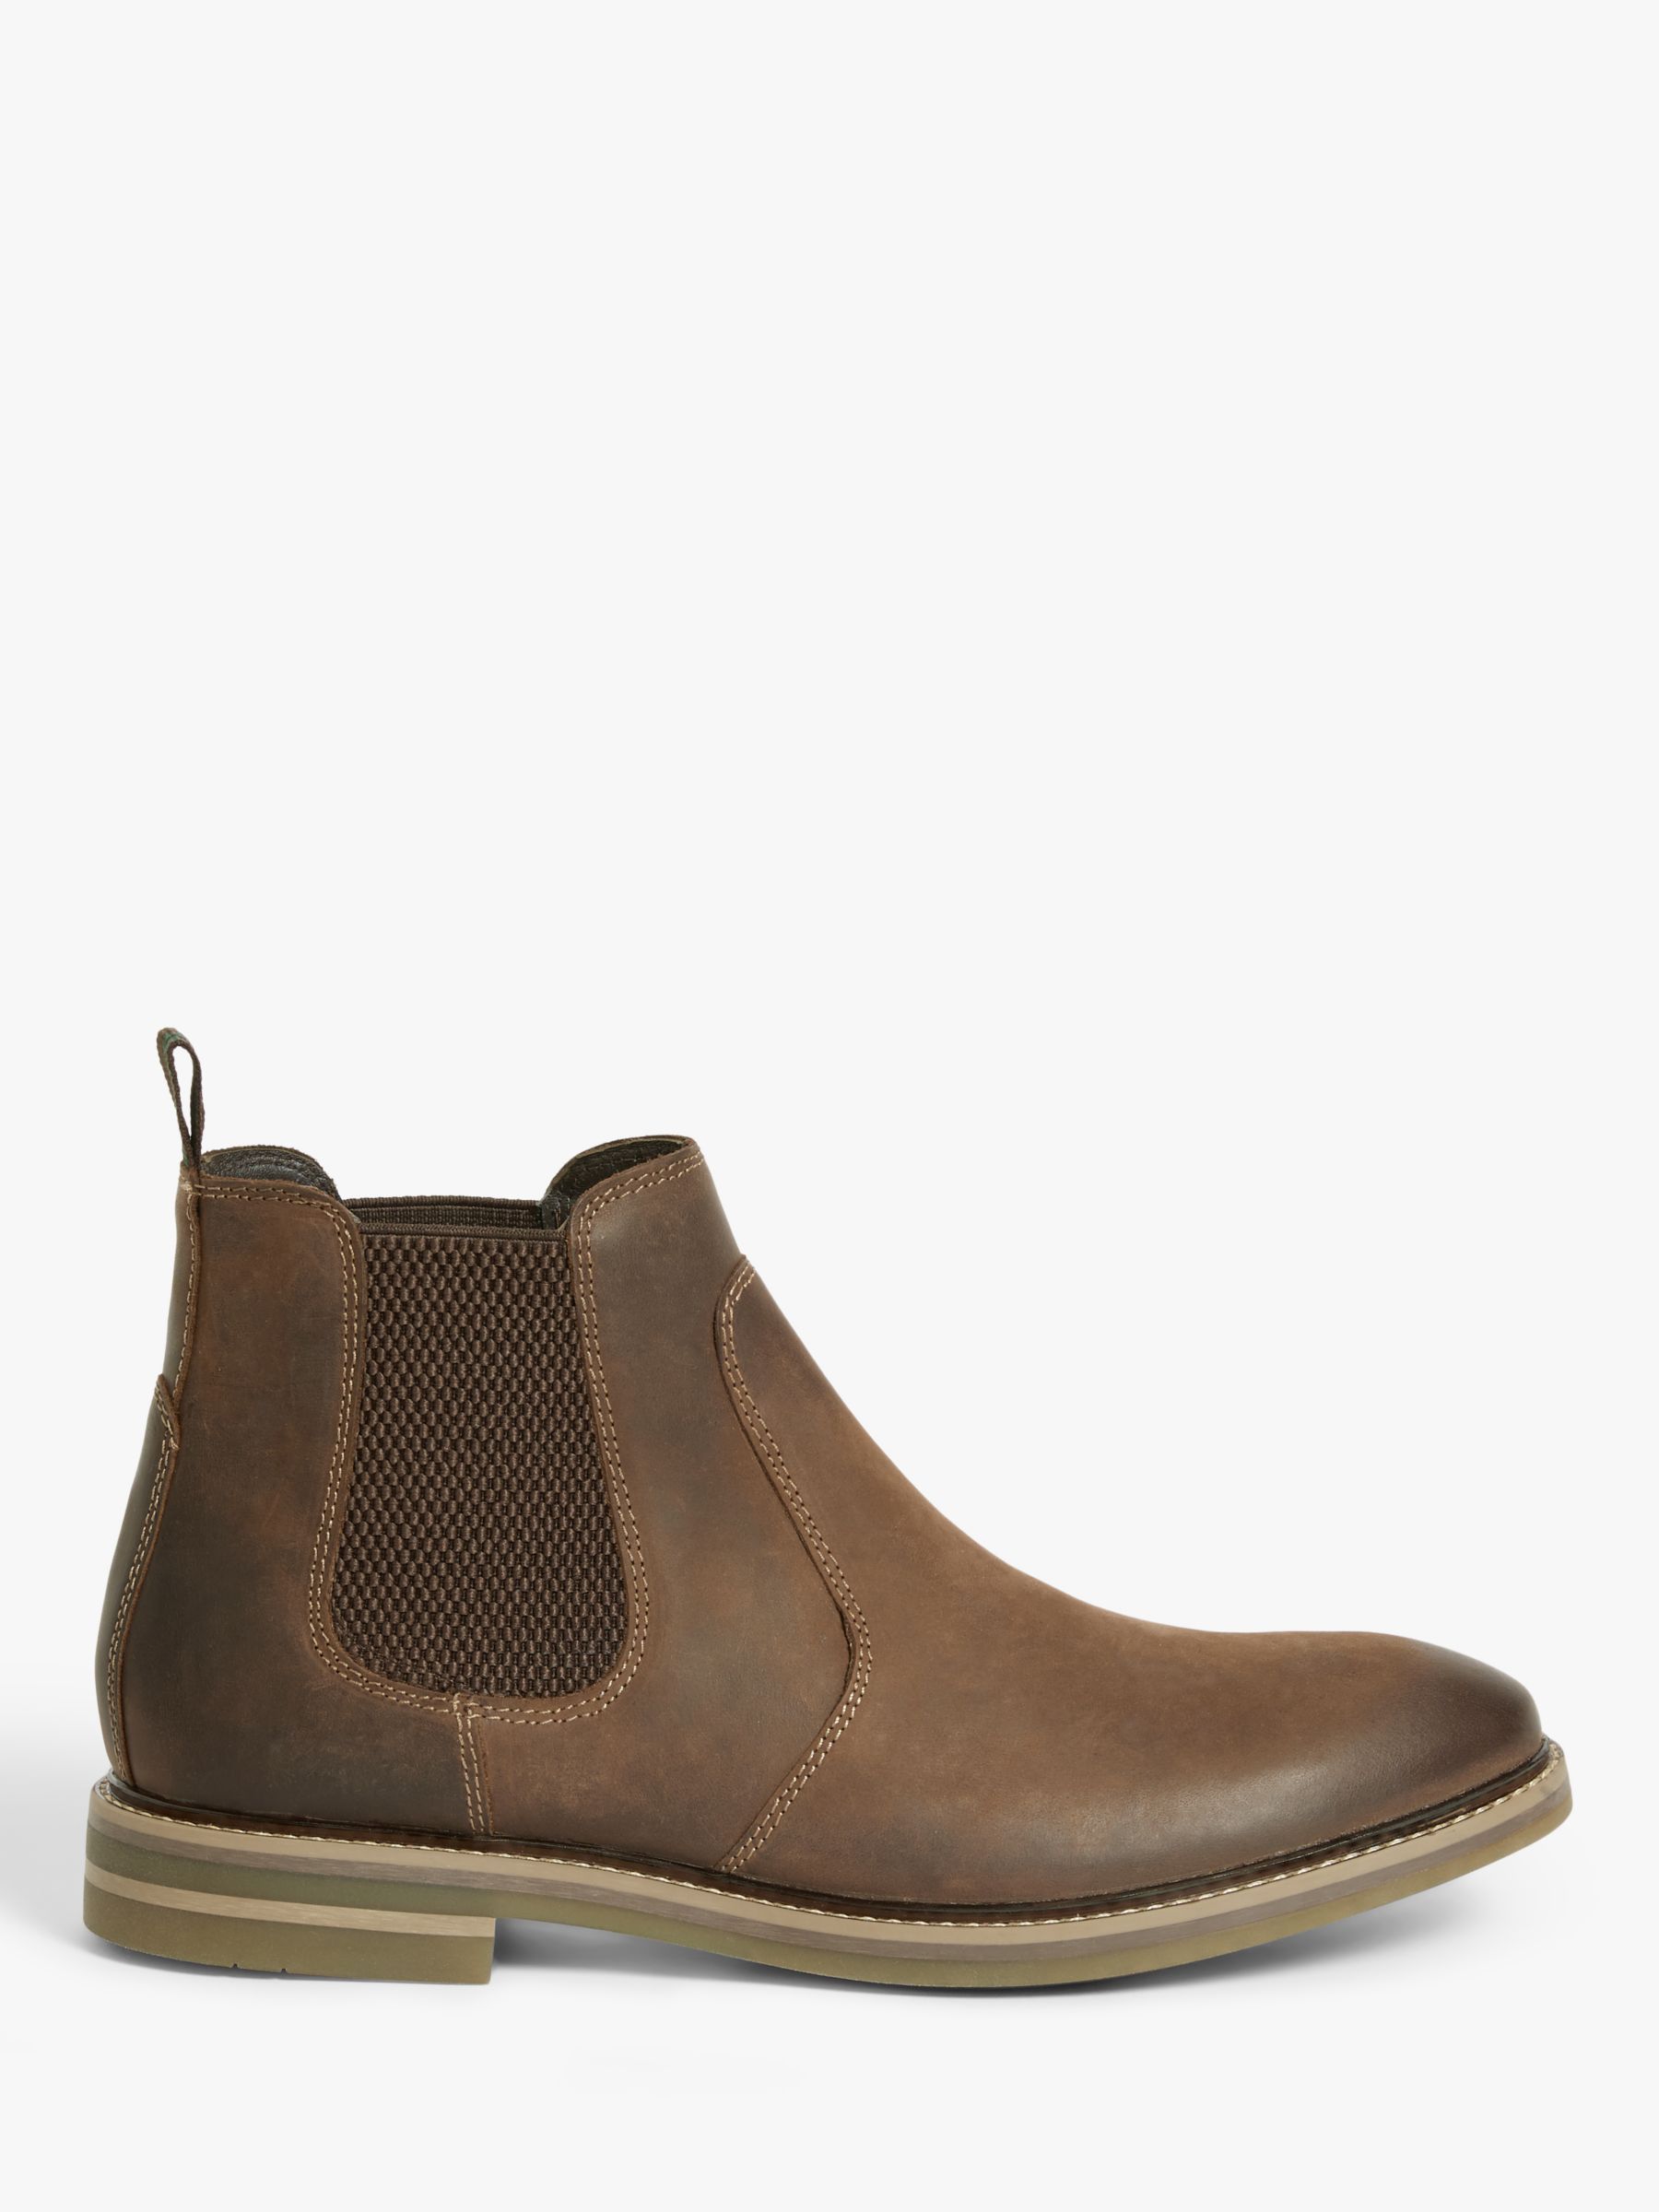 John Lewis & Partners Country Chelsea Boots, Tan at John Lewis & Partners